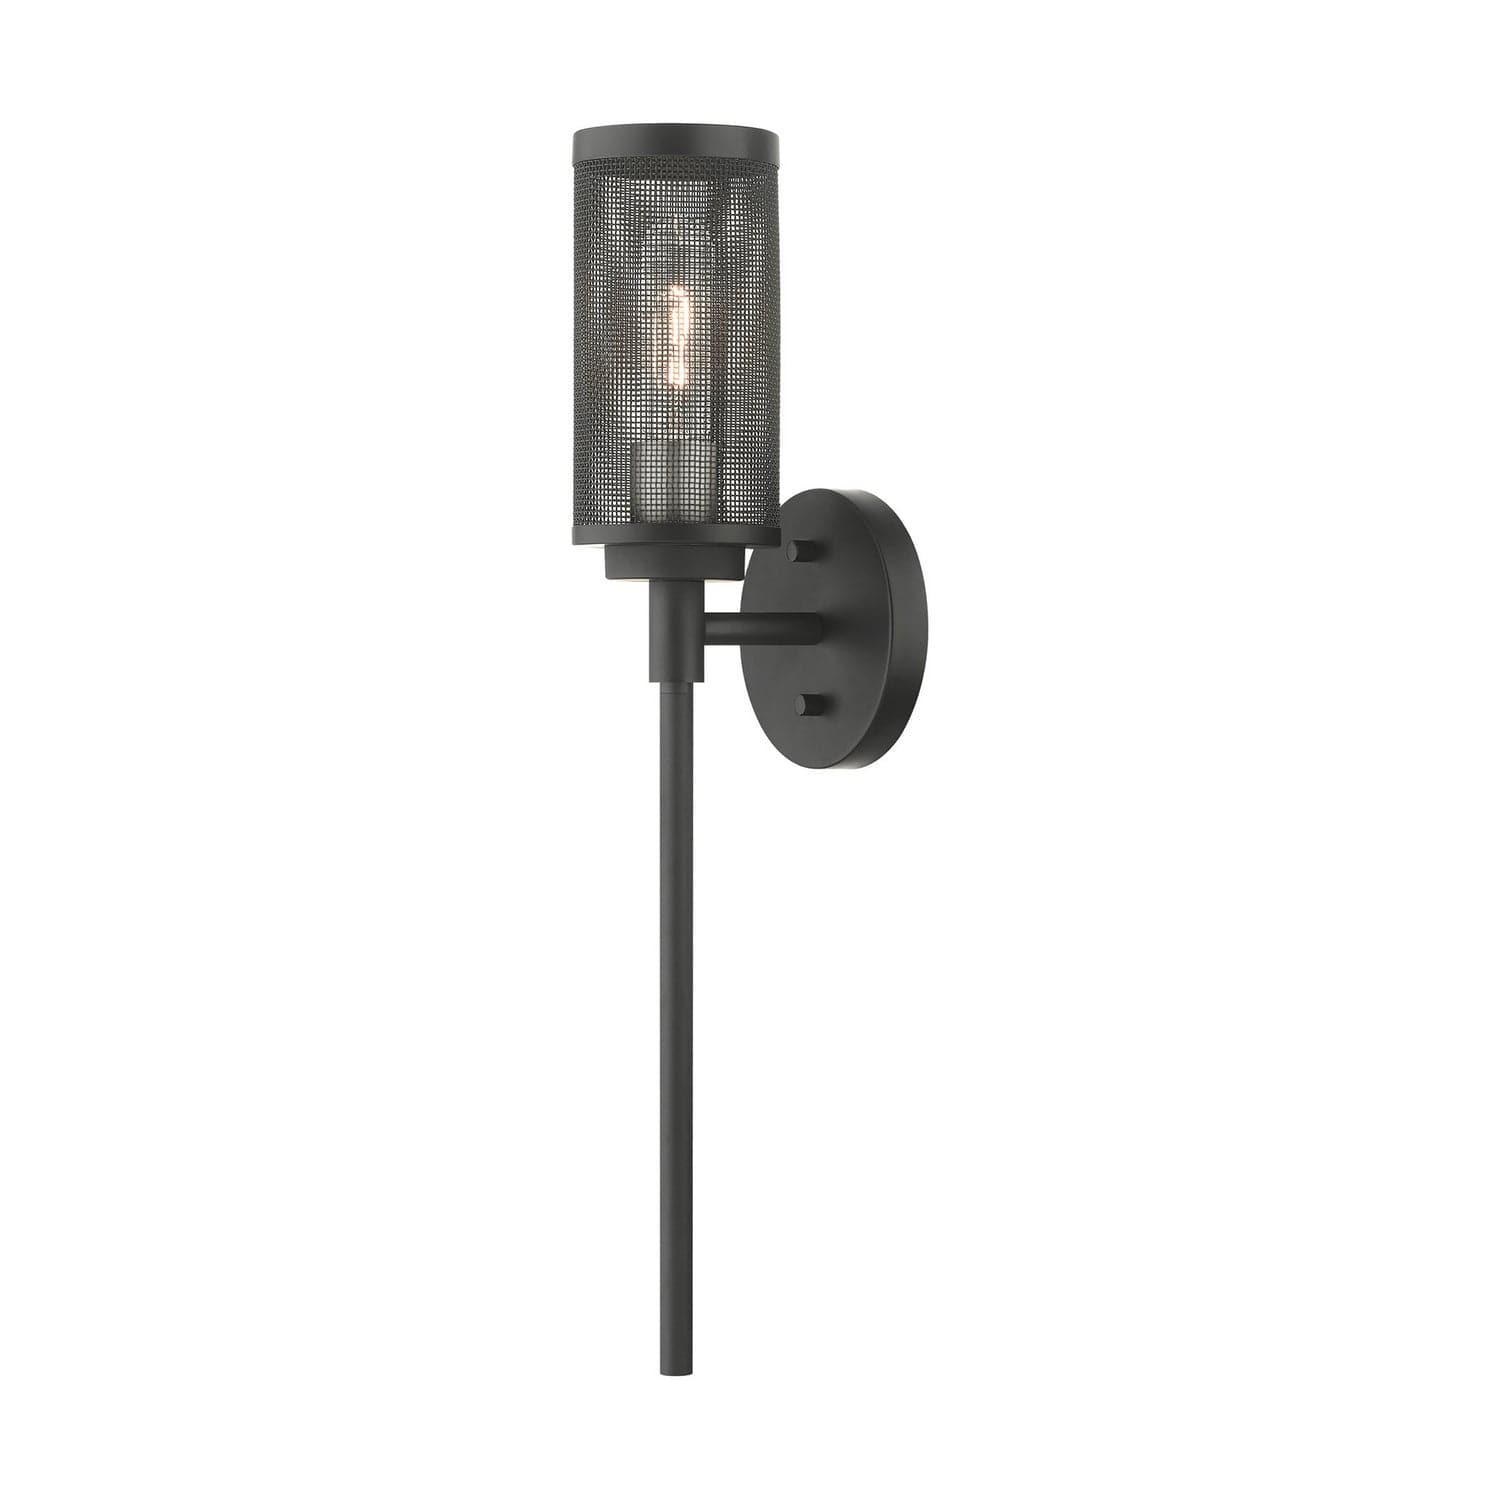 Livex Lighting - 14121-04 - One Light Wall Sconce - Industro - Black w/ Brushed Nickels